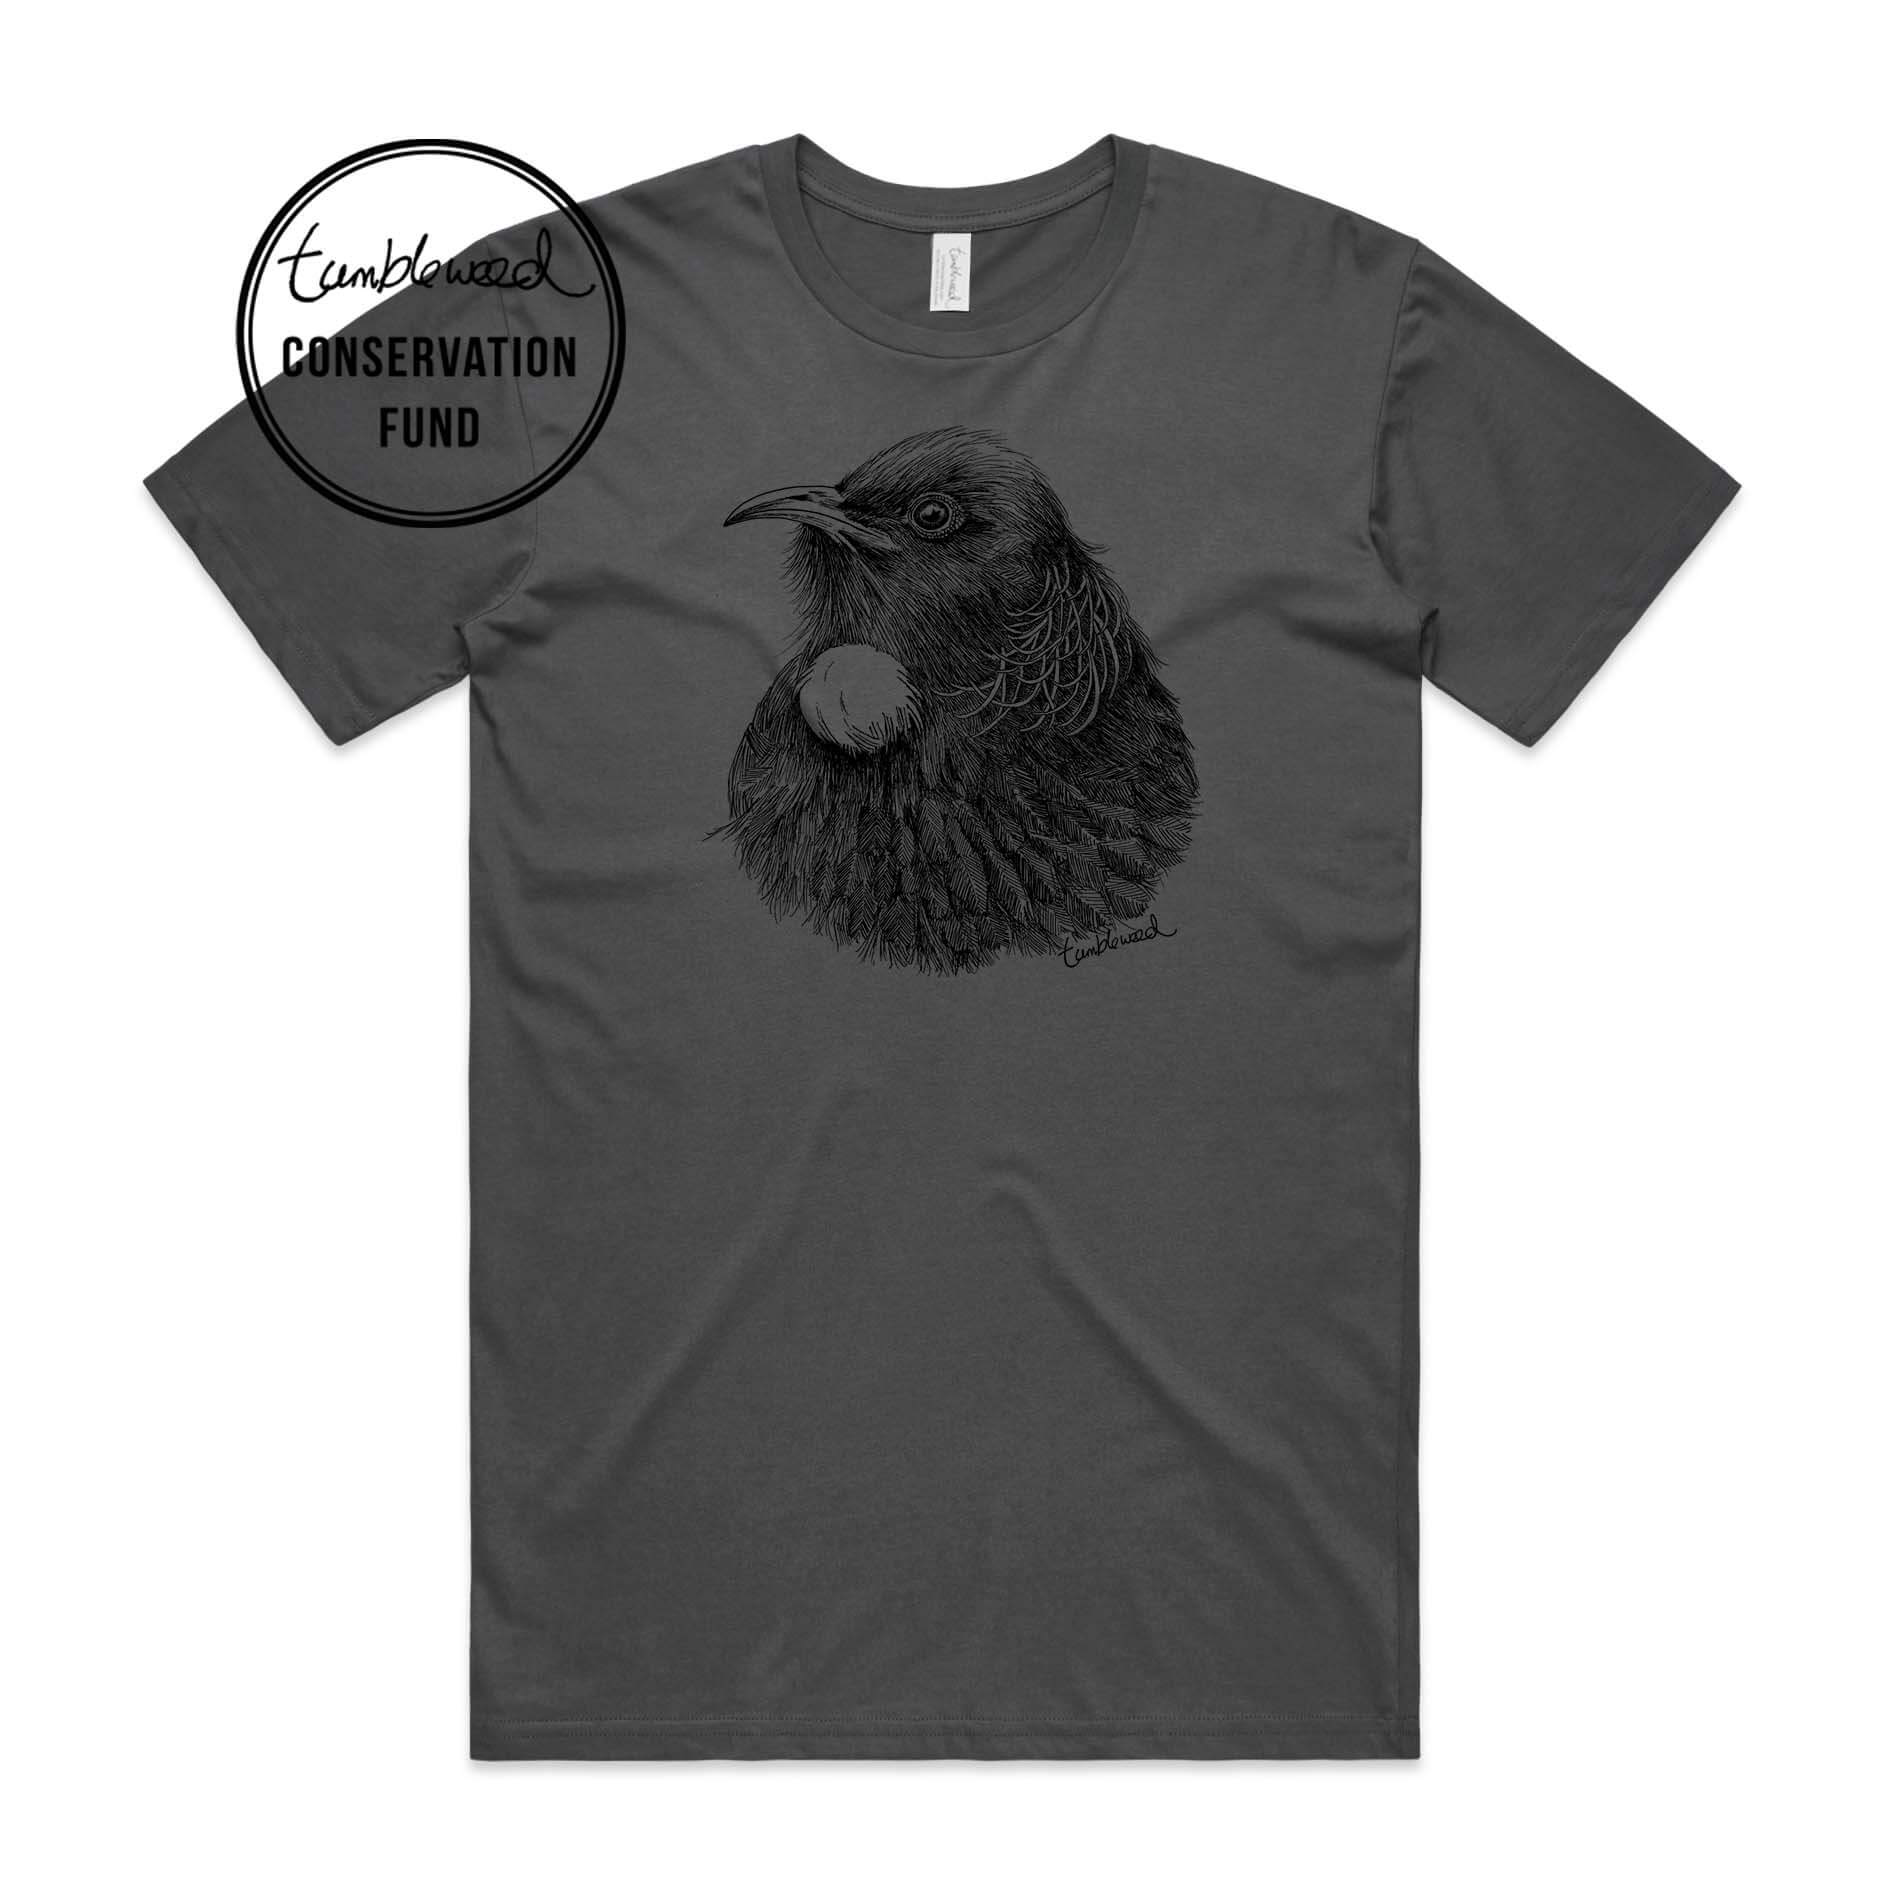 Charcoal, female t-shirt featuring a screen printed Tui design.